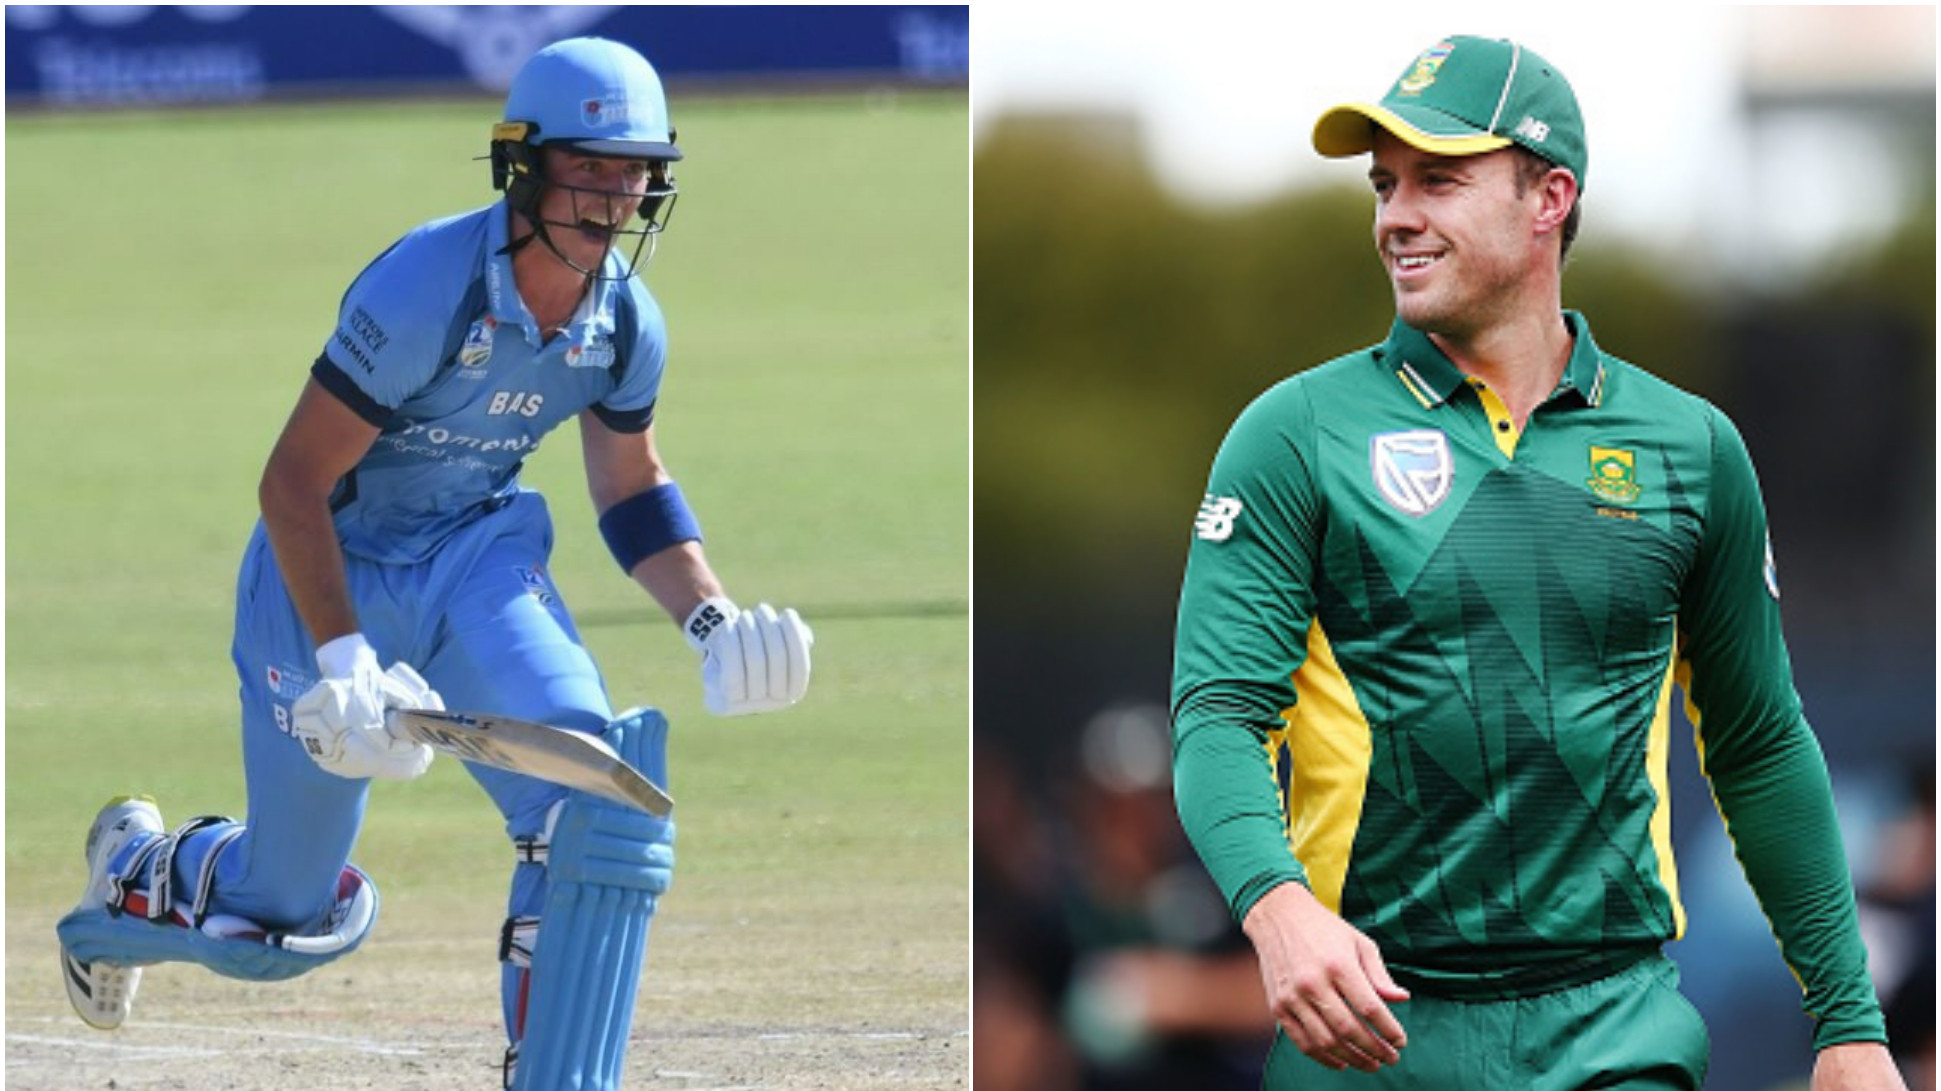 “I like AB’s natural bat swing” - Dewald Brevis after AB de Villiers style innings in CSA T20 Challenge